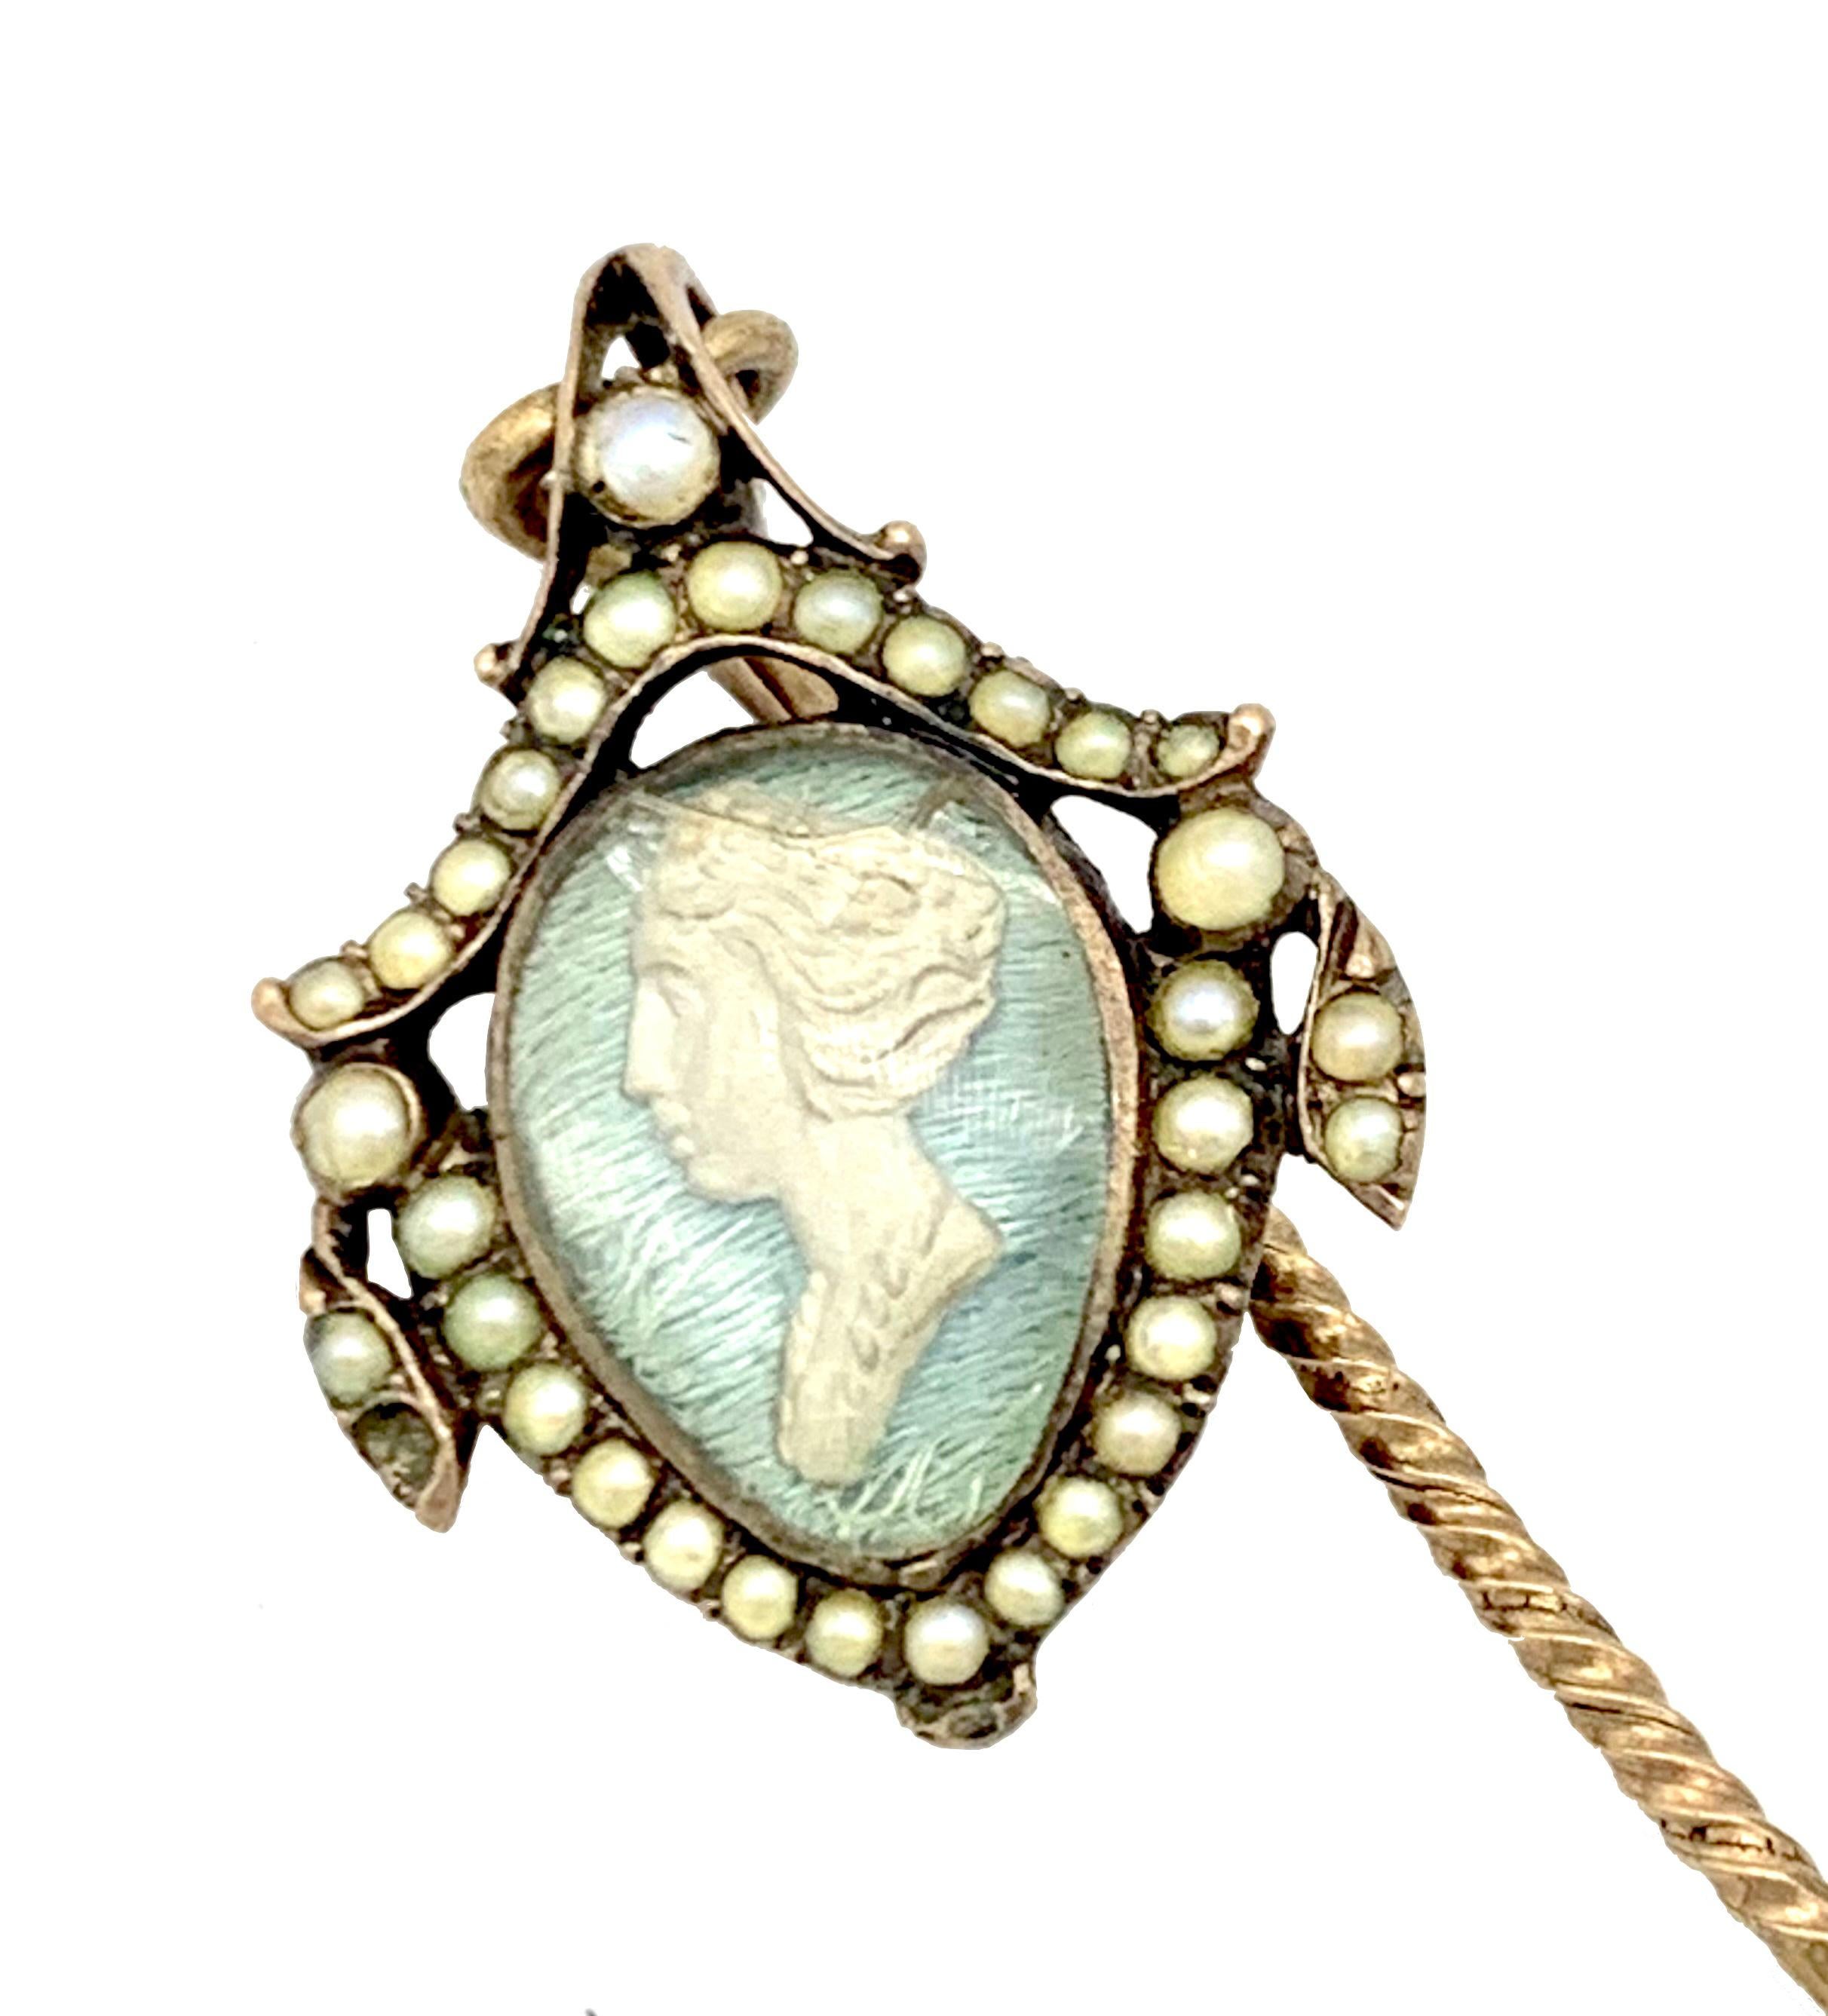 This lovely tiny 18th century pendant Locket was crate out 14 katat gold. The outline of the little jewel is decorated with natural seed pearls, one pearl is currently missing but will be replaced. The front of the locket shows a profile portrait of